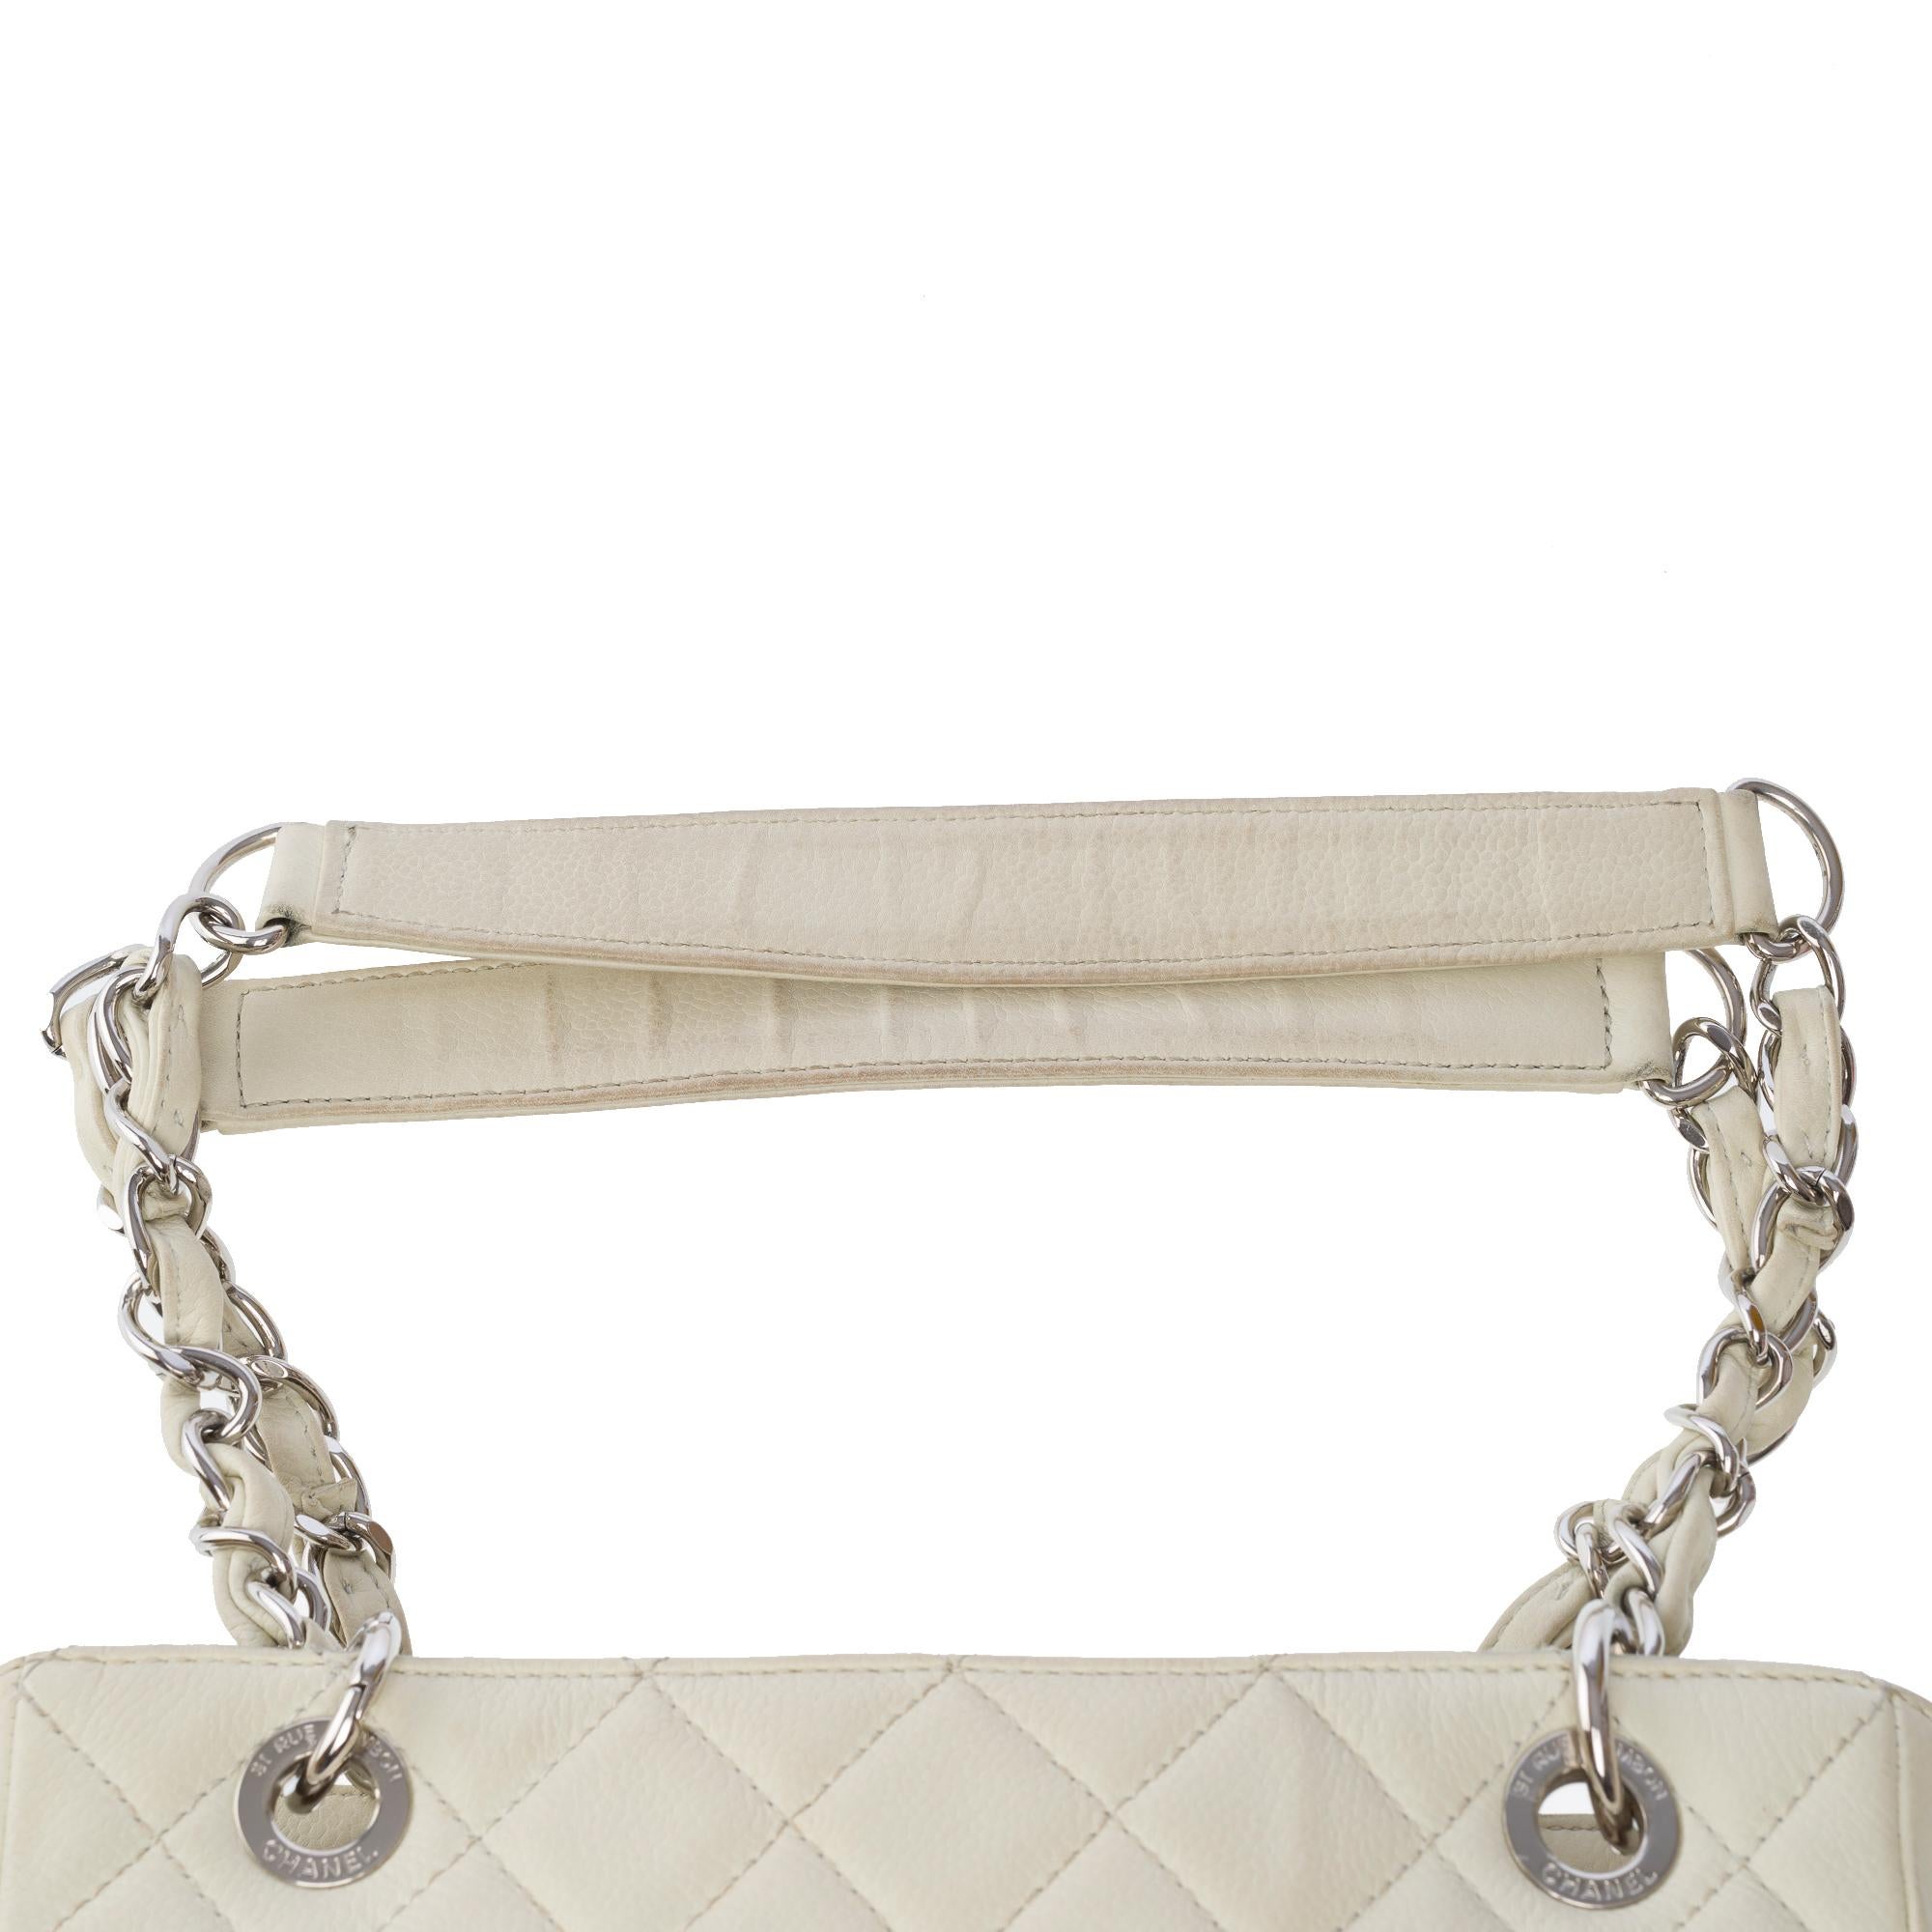  Chanel Petit Shopping Tote bag (PST) in Off-White Caviar quilted leather, SHW For Sale 6